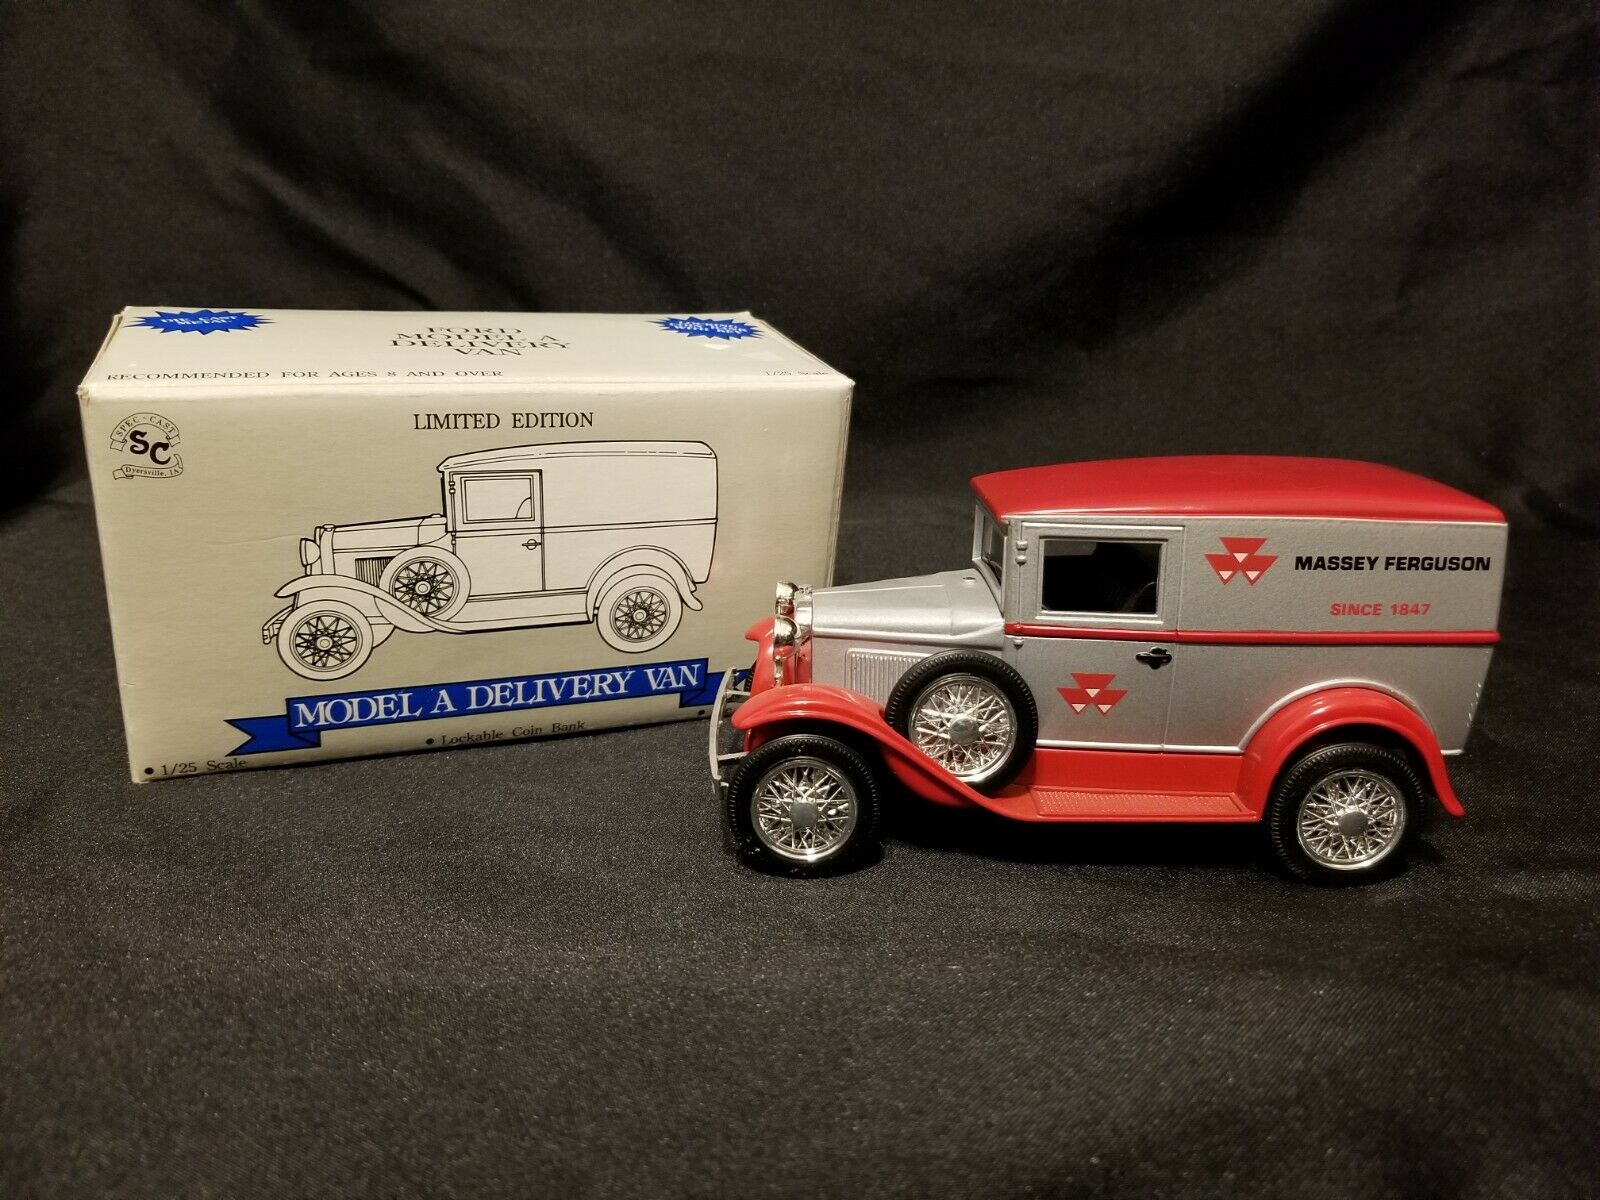 New Massey Ferguson Ford Model A Delivery Van Bank Limited Edition 1:25